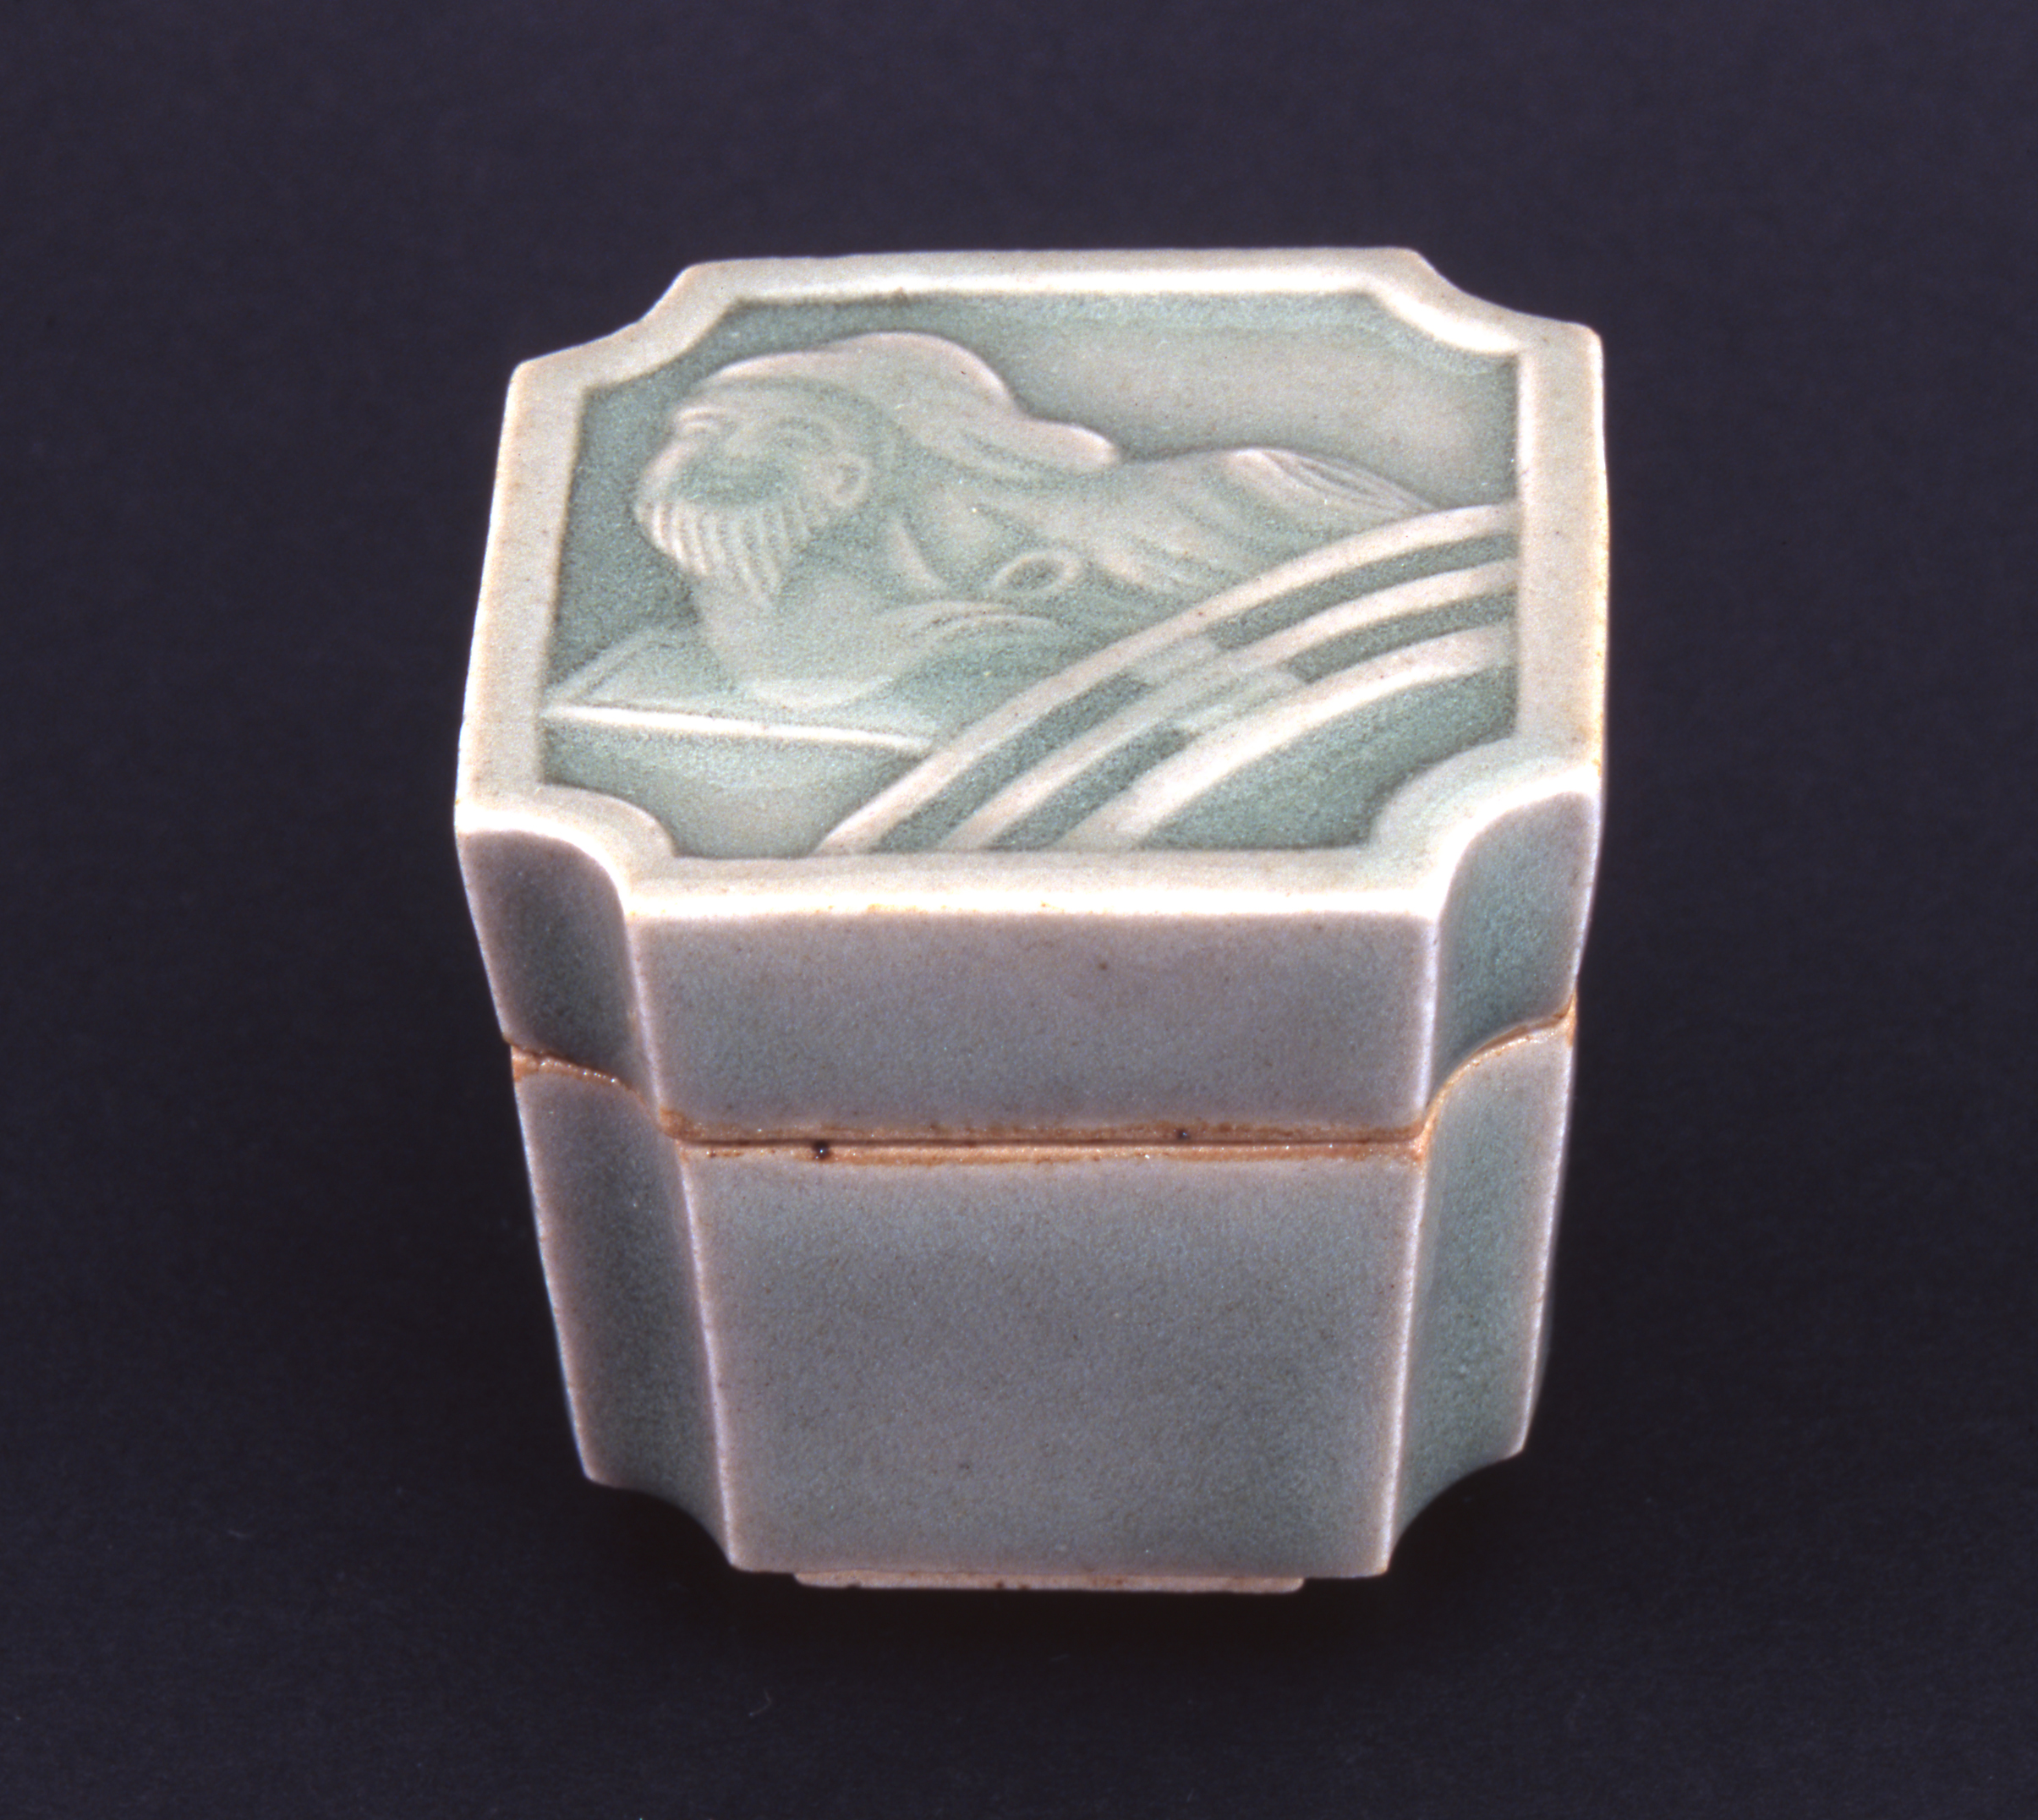 Zuishi-yaki pottery, Zhou Maoshu’s face carved on a celadon incense container used for tea ceremonies (museum collection)